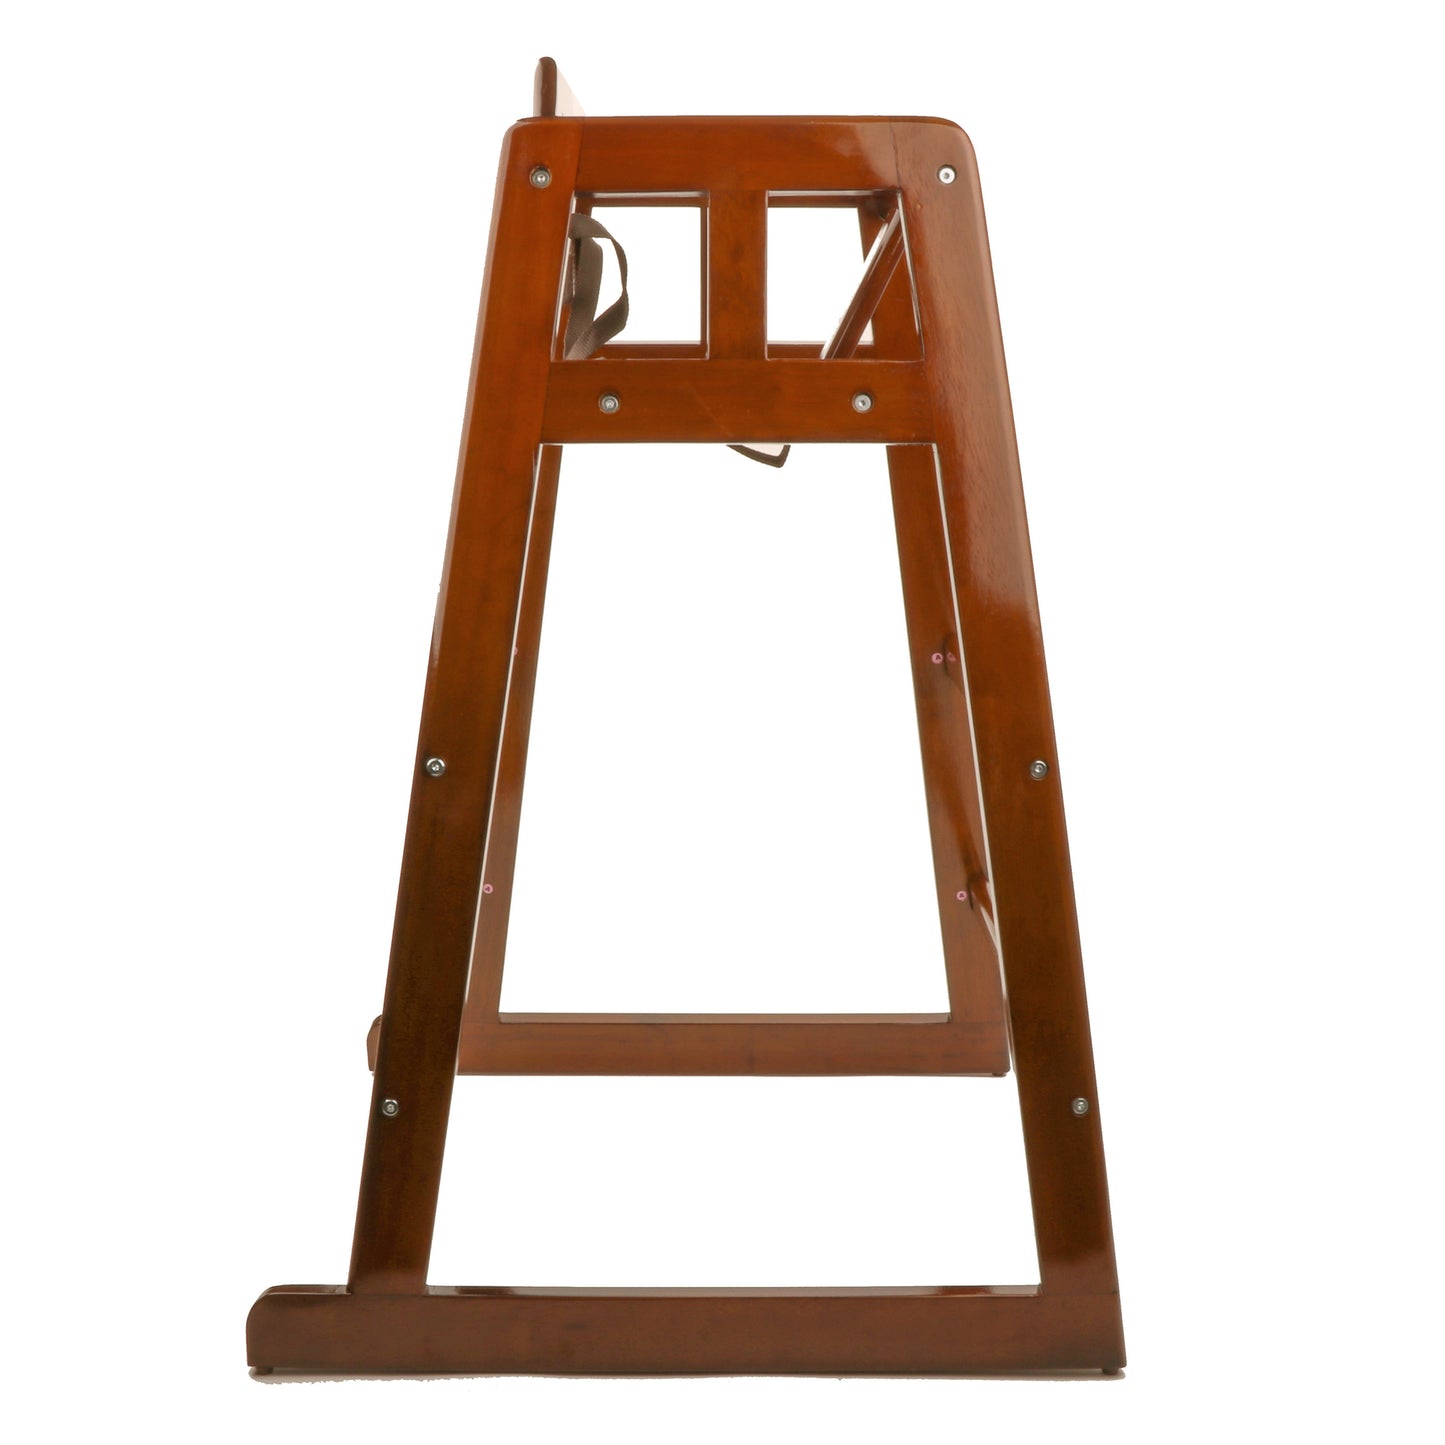 36" Tall, Walnut, Hardwood, Modified High Chair, 22" L x 25" W, Assembly Required, G.E.T. High Chairs